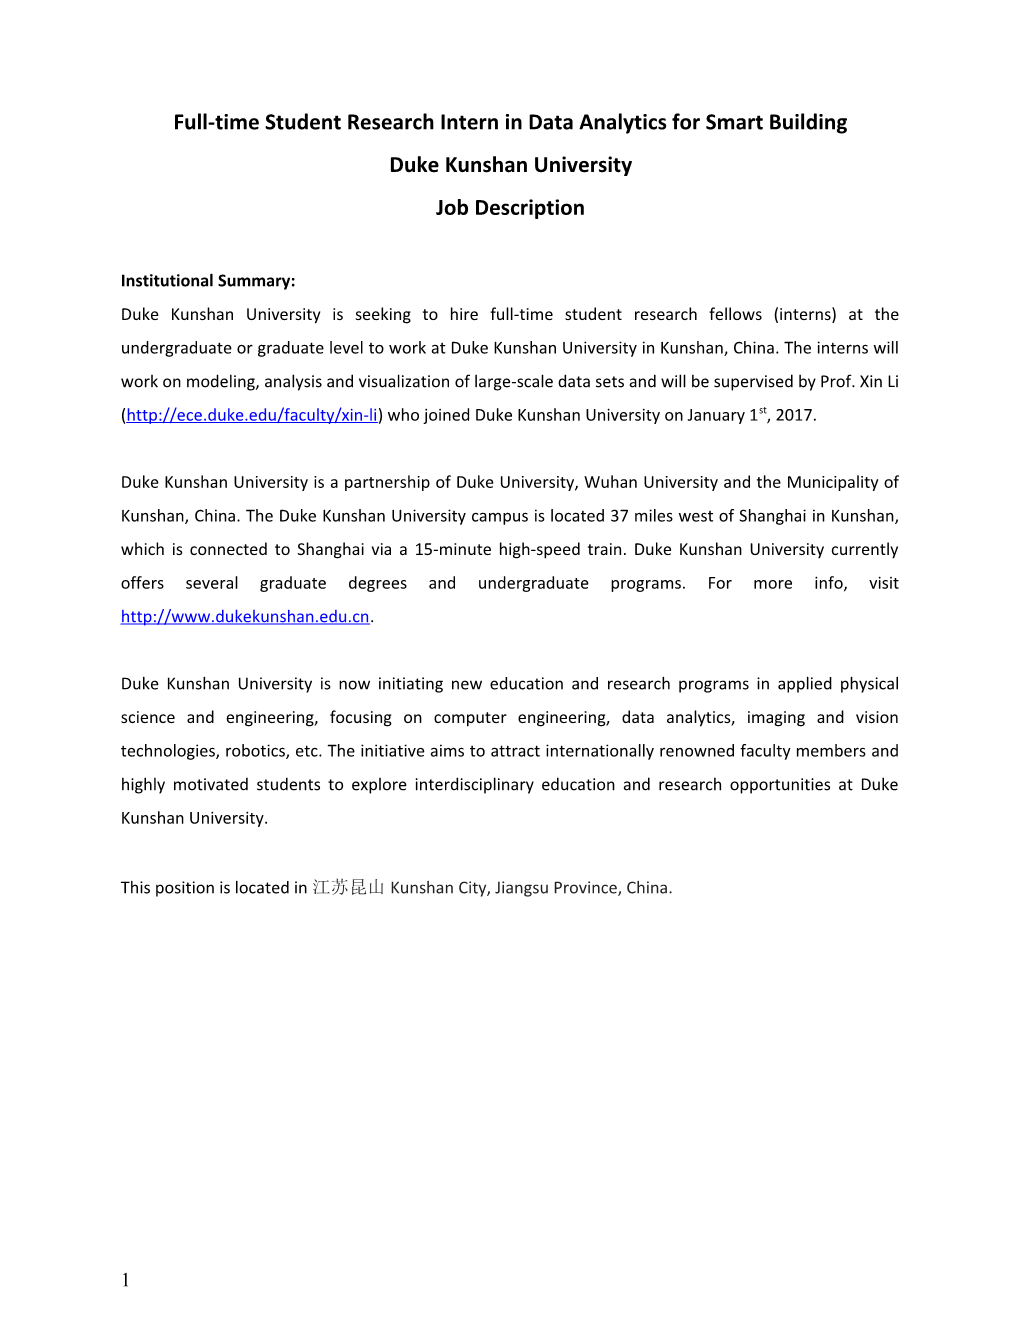 Full-Time Student Research Intern in Data Analytics for Smart Building